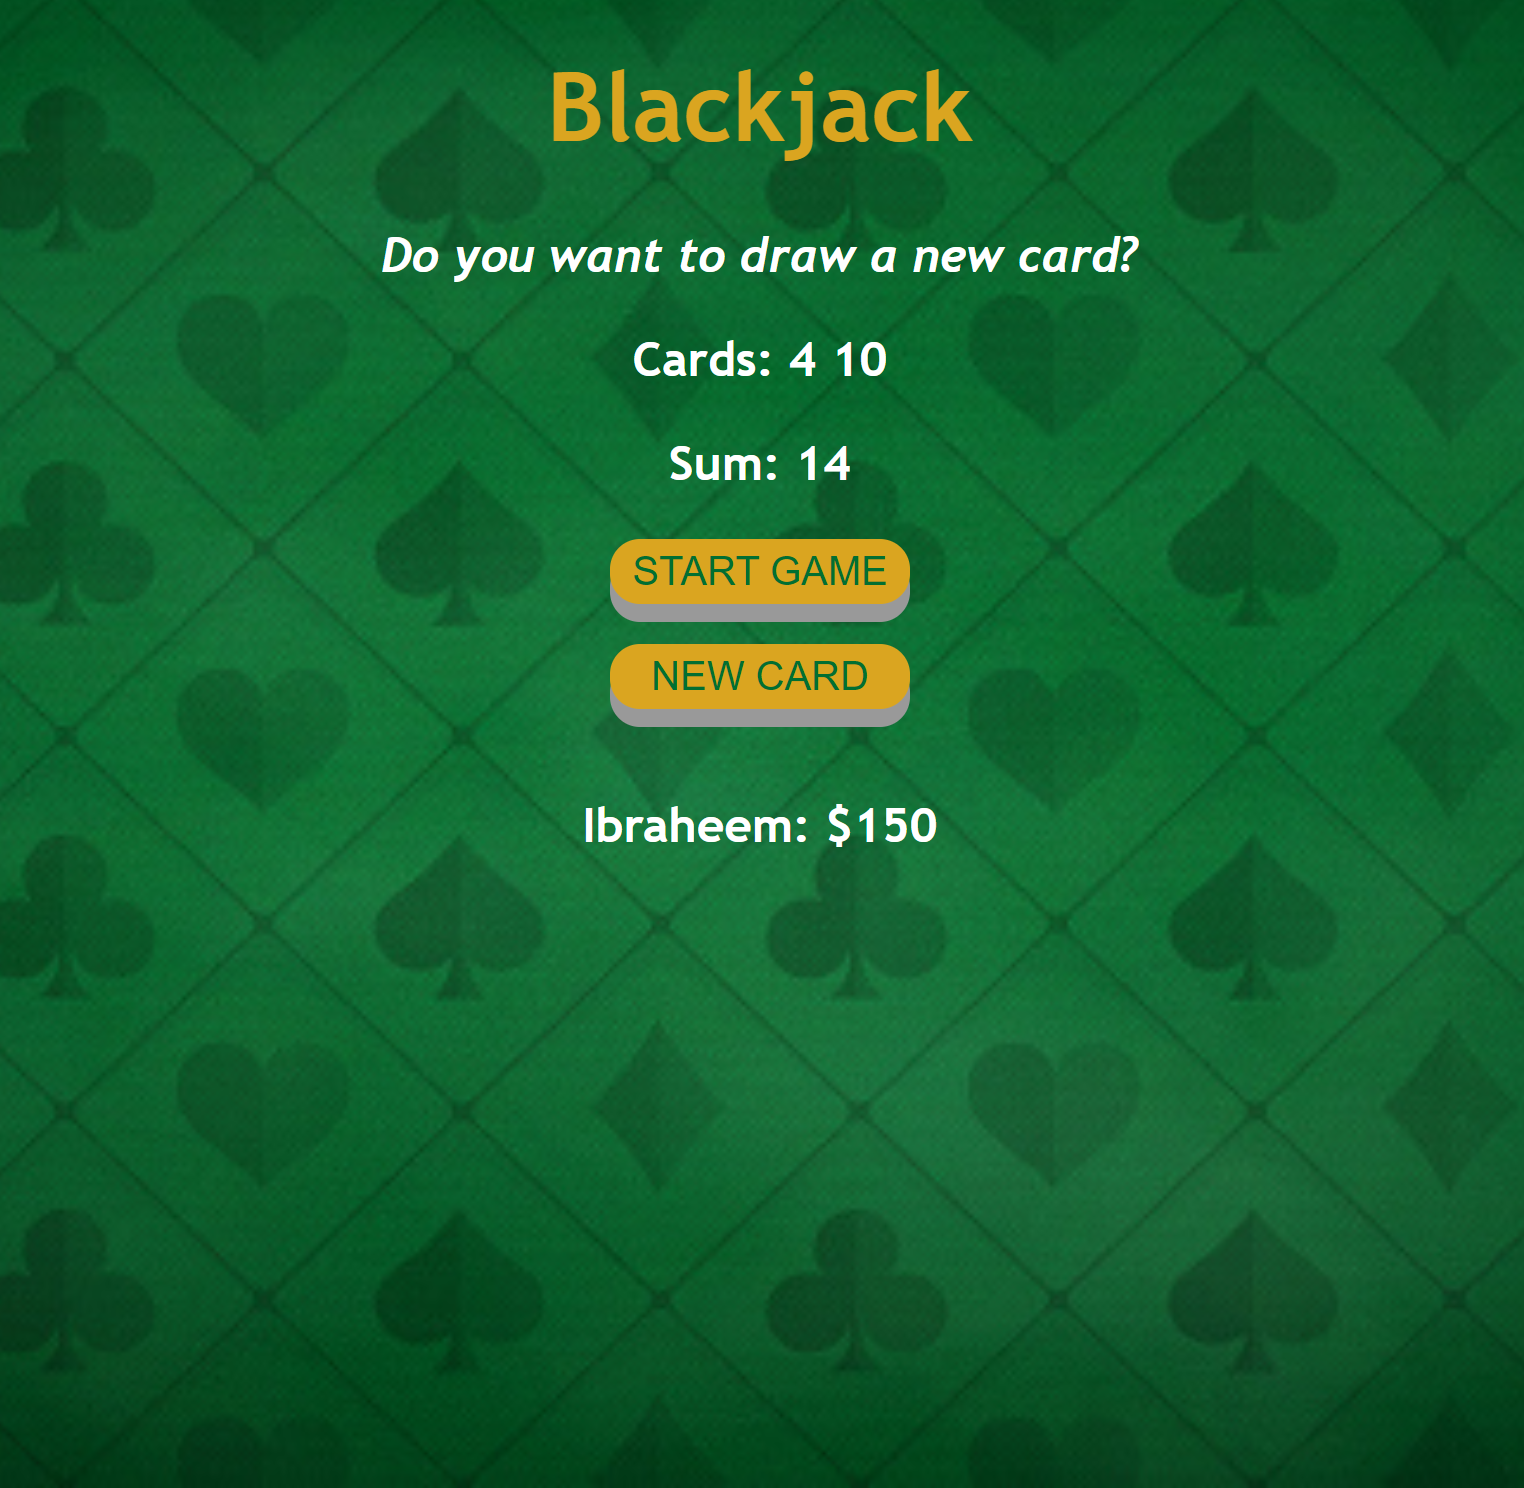 An image of a Blackjack game